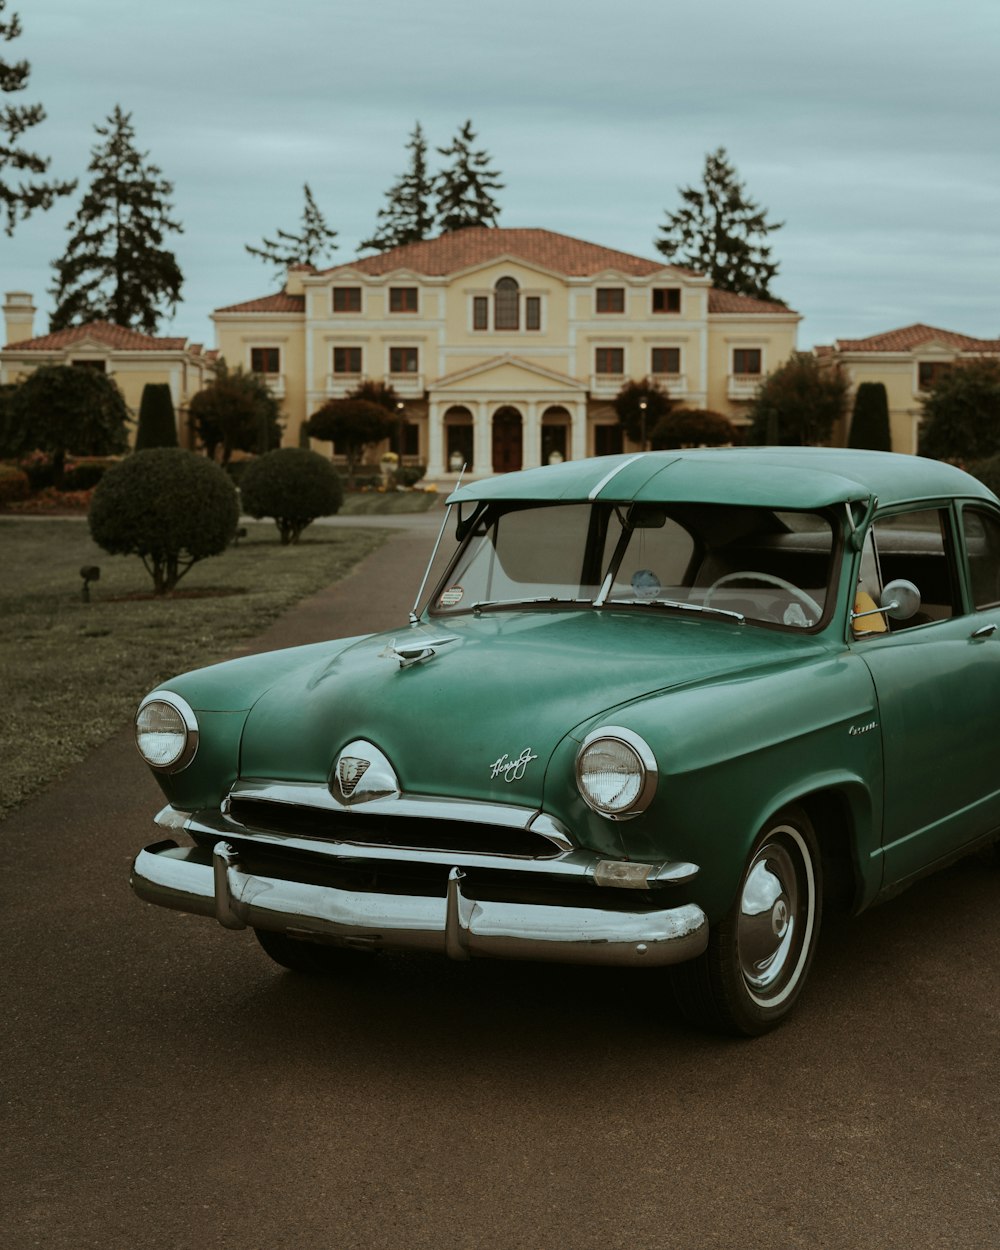 an old green car parked in front of a large house